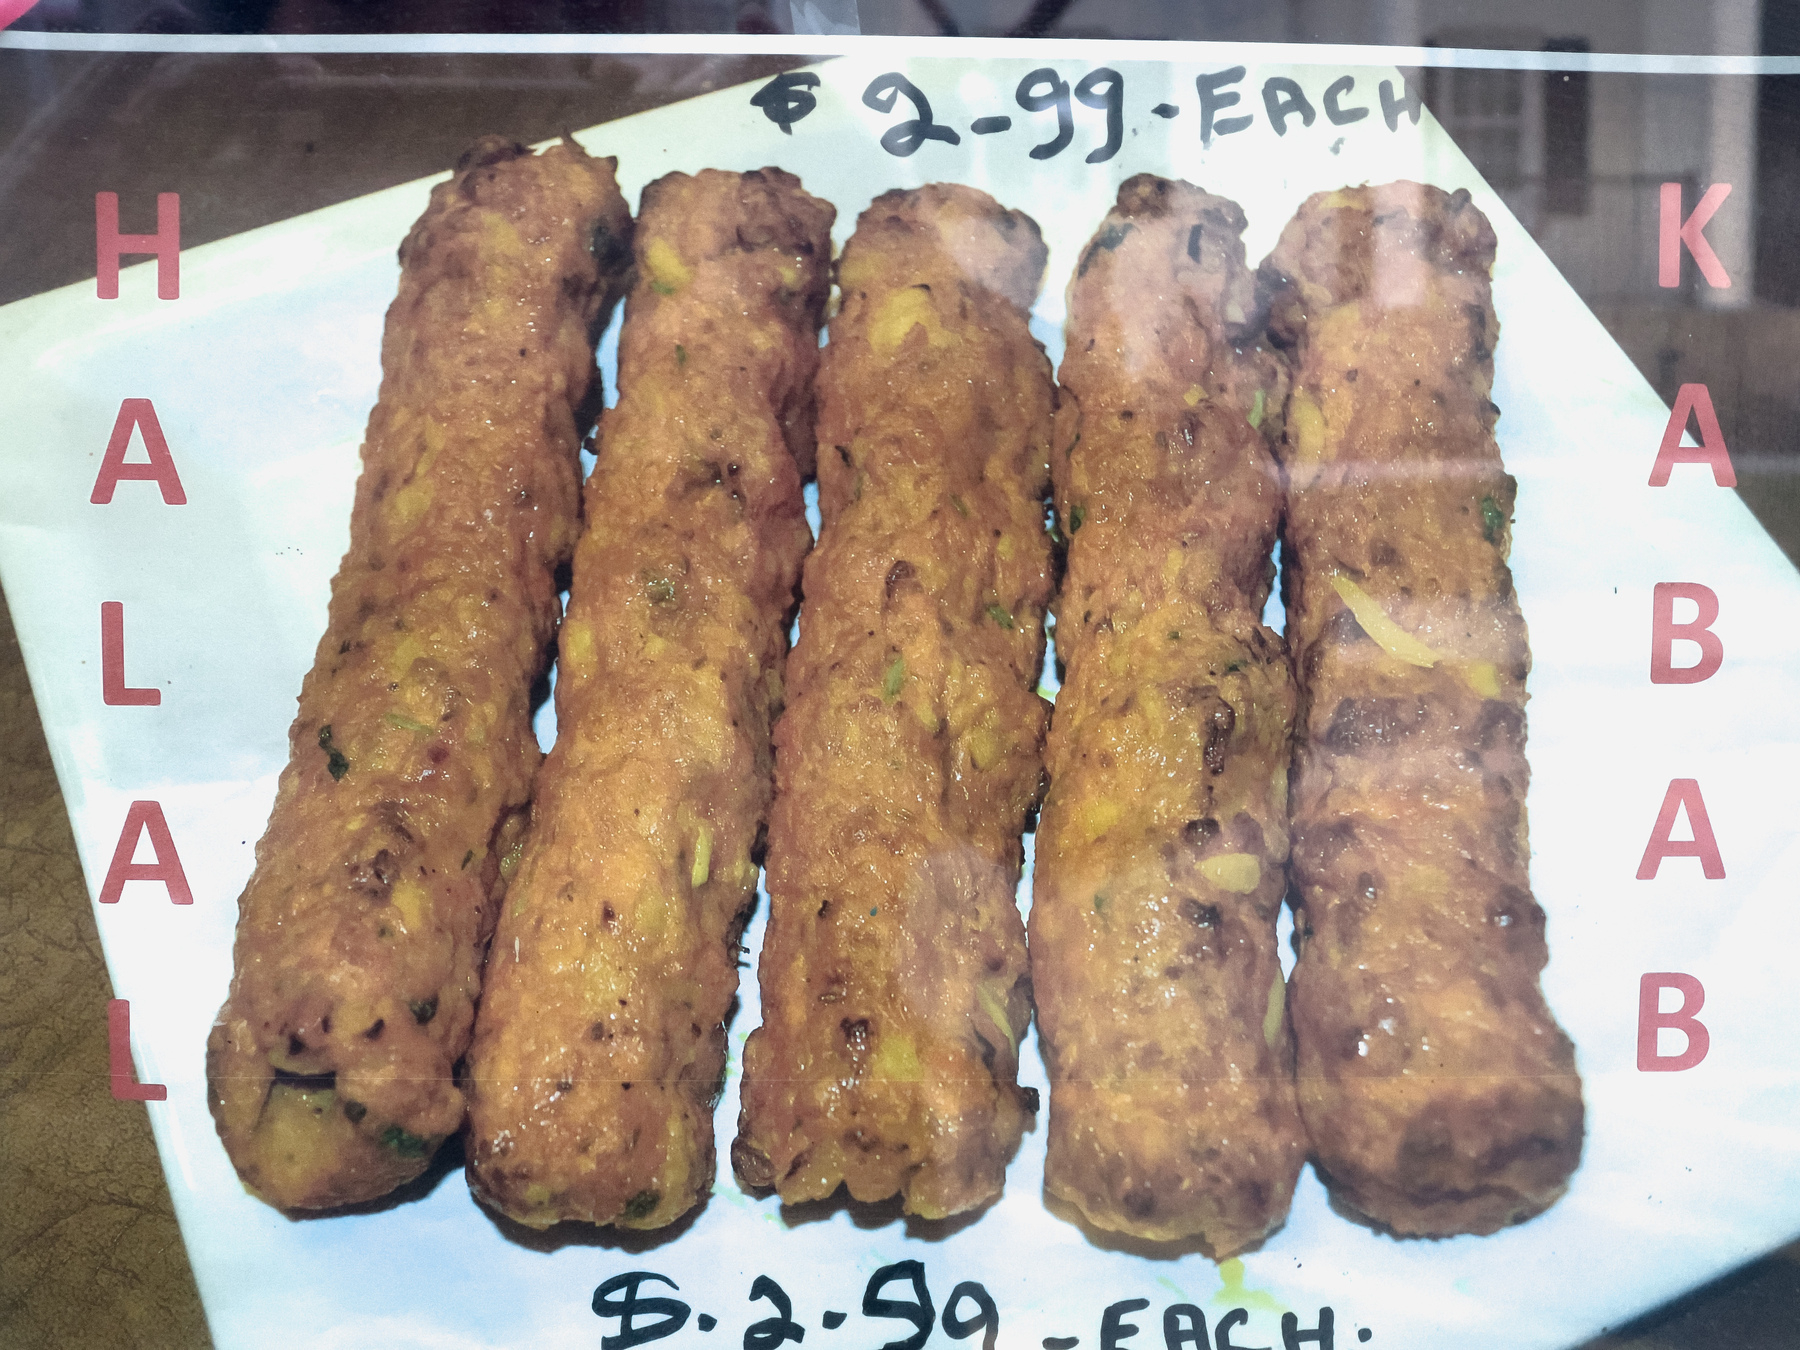 Halal Kabab poster in restaurant window showing 5 kababs and price of $2.99 each.